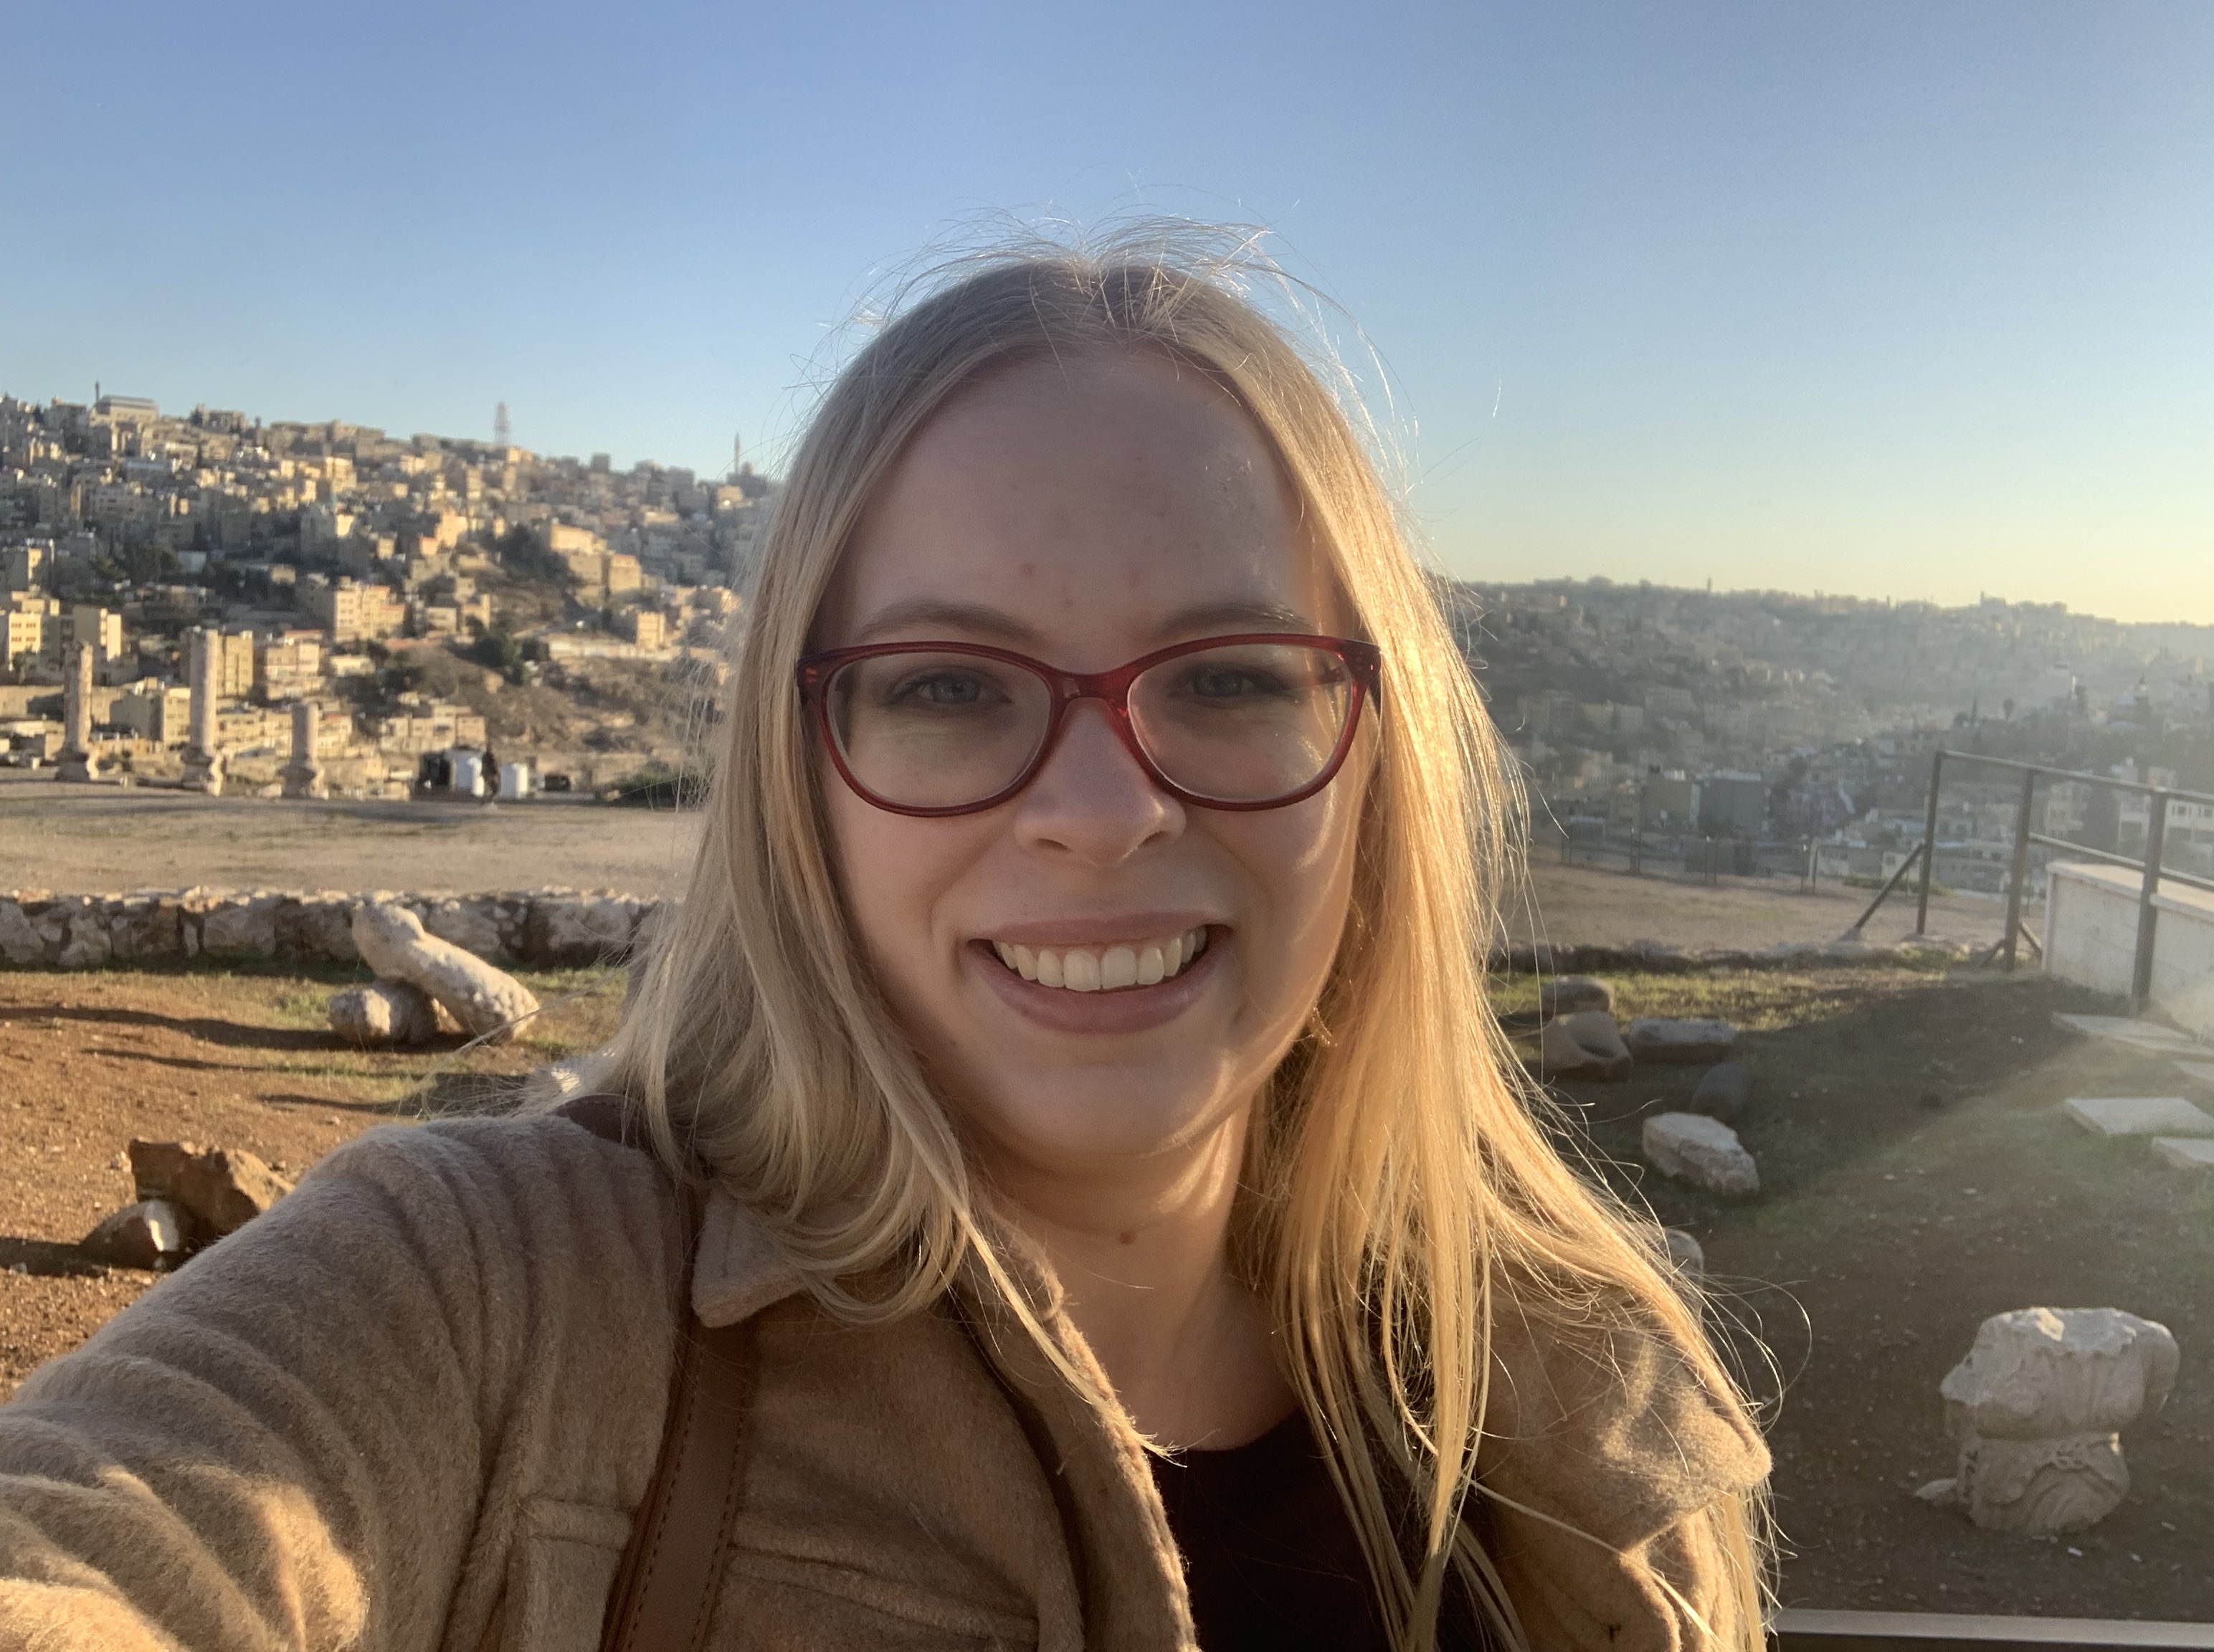 Photo of a young white woman with long, blond hair and red glasses, wearing a tan colored coat. The skyline of Amman, Jordan is visible in the background.